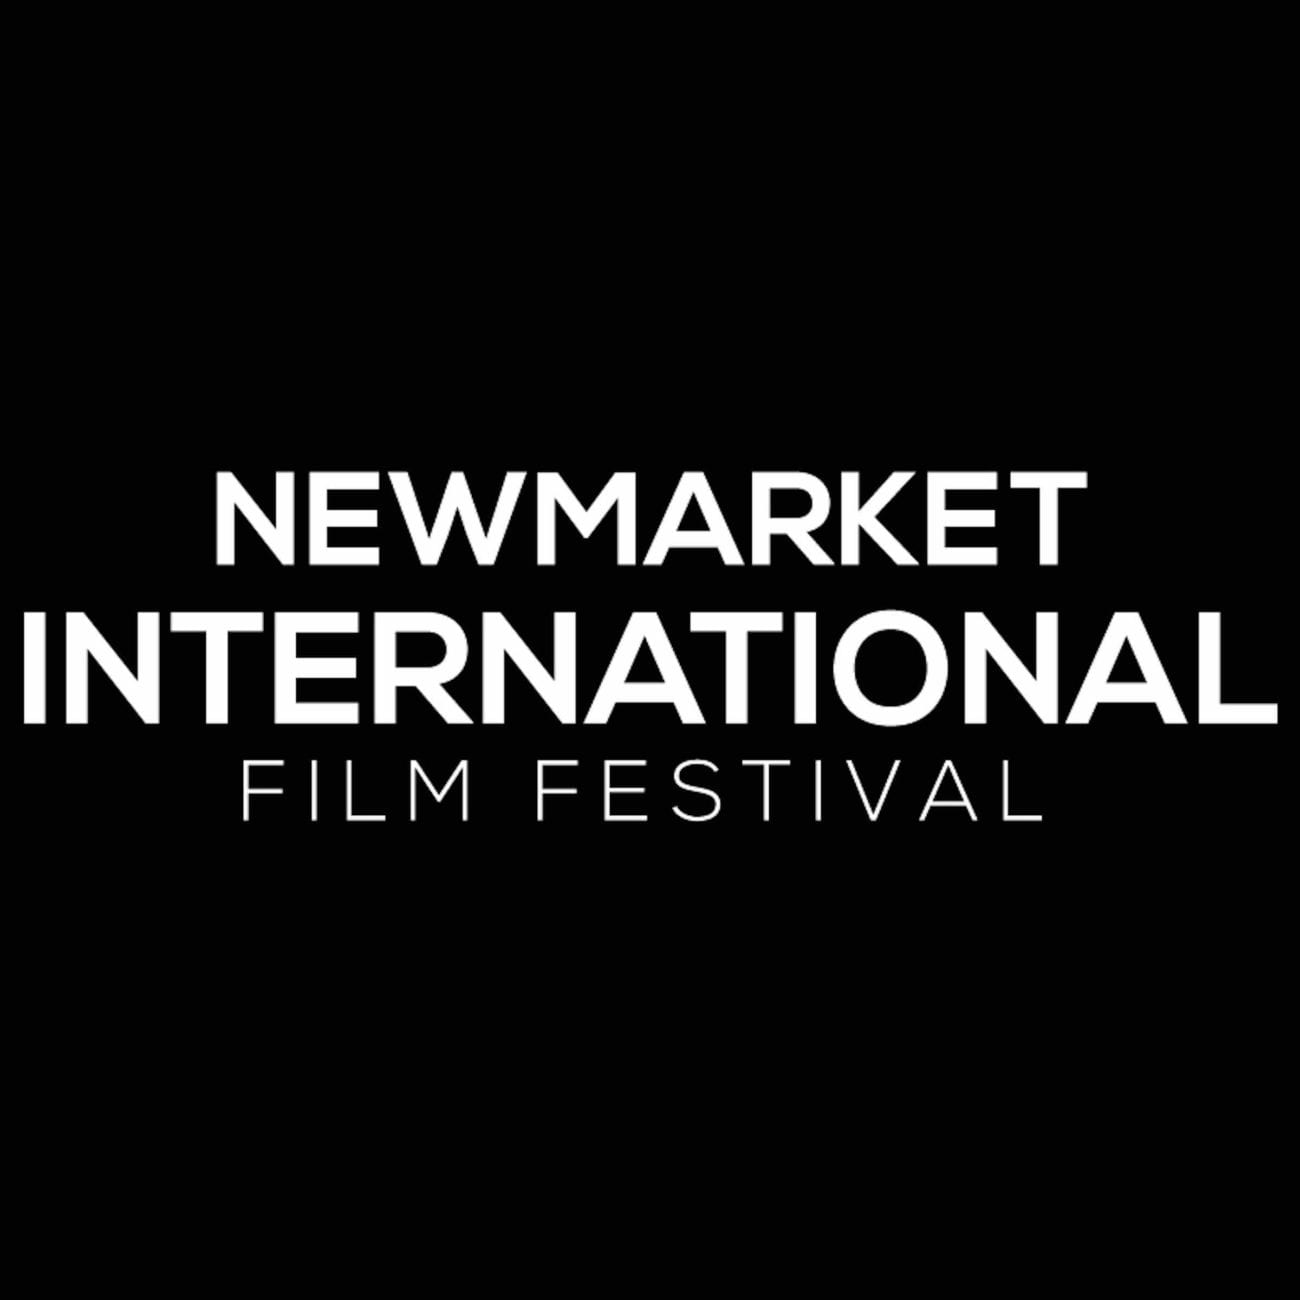 NIFF or Newmarket International Film Festival is an emerging film festival. Here's why NIFF needs to be on your submission list.